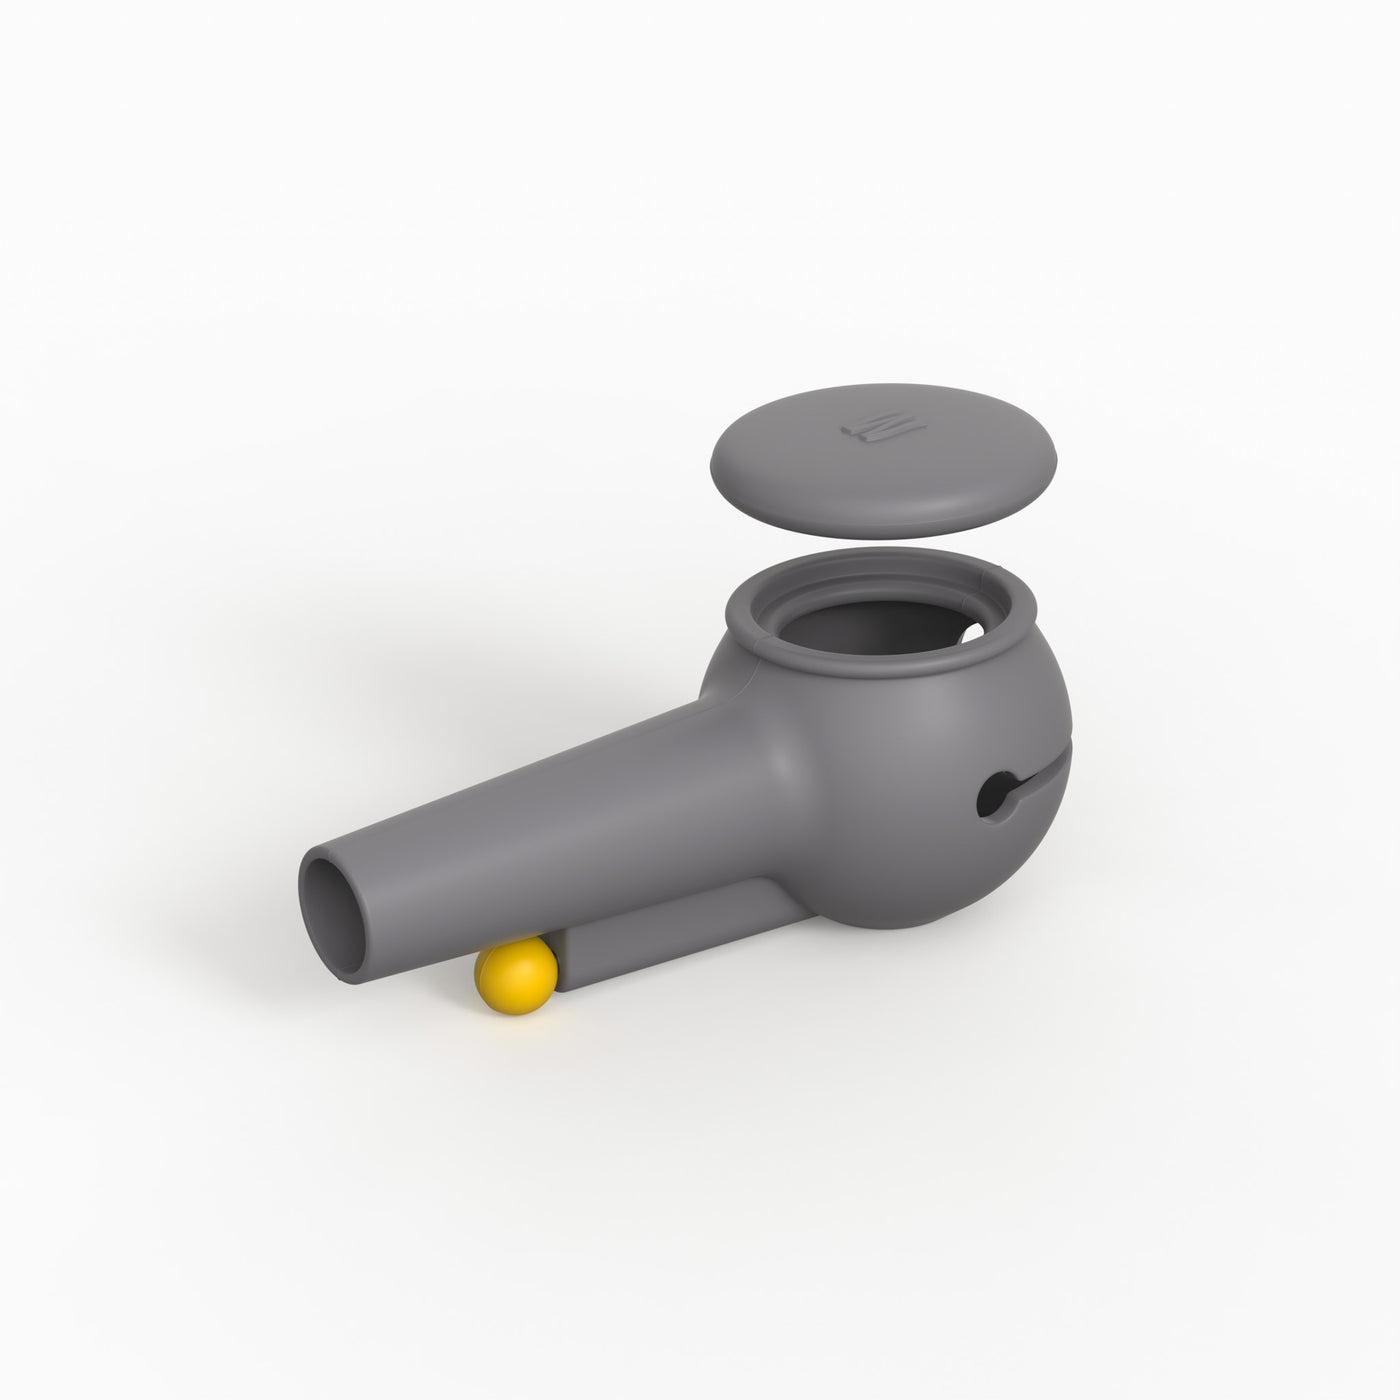 Rendered product photo of smoke gray covers with cap uncovered, appearing to float in mid-air.